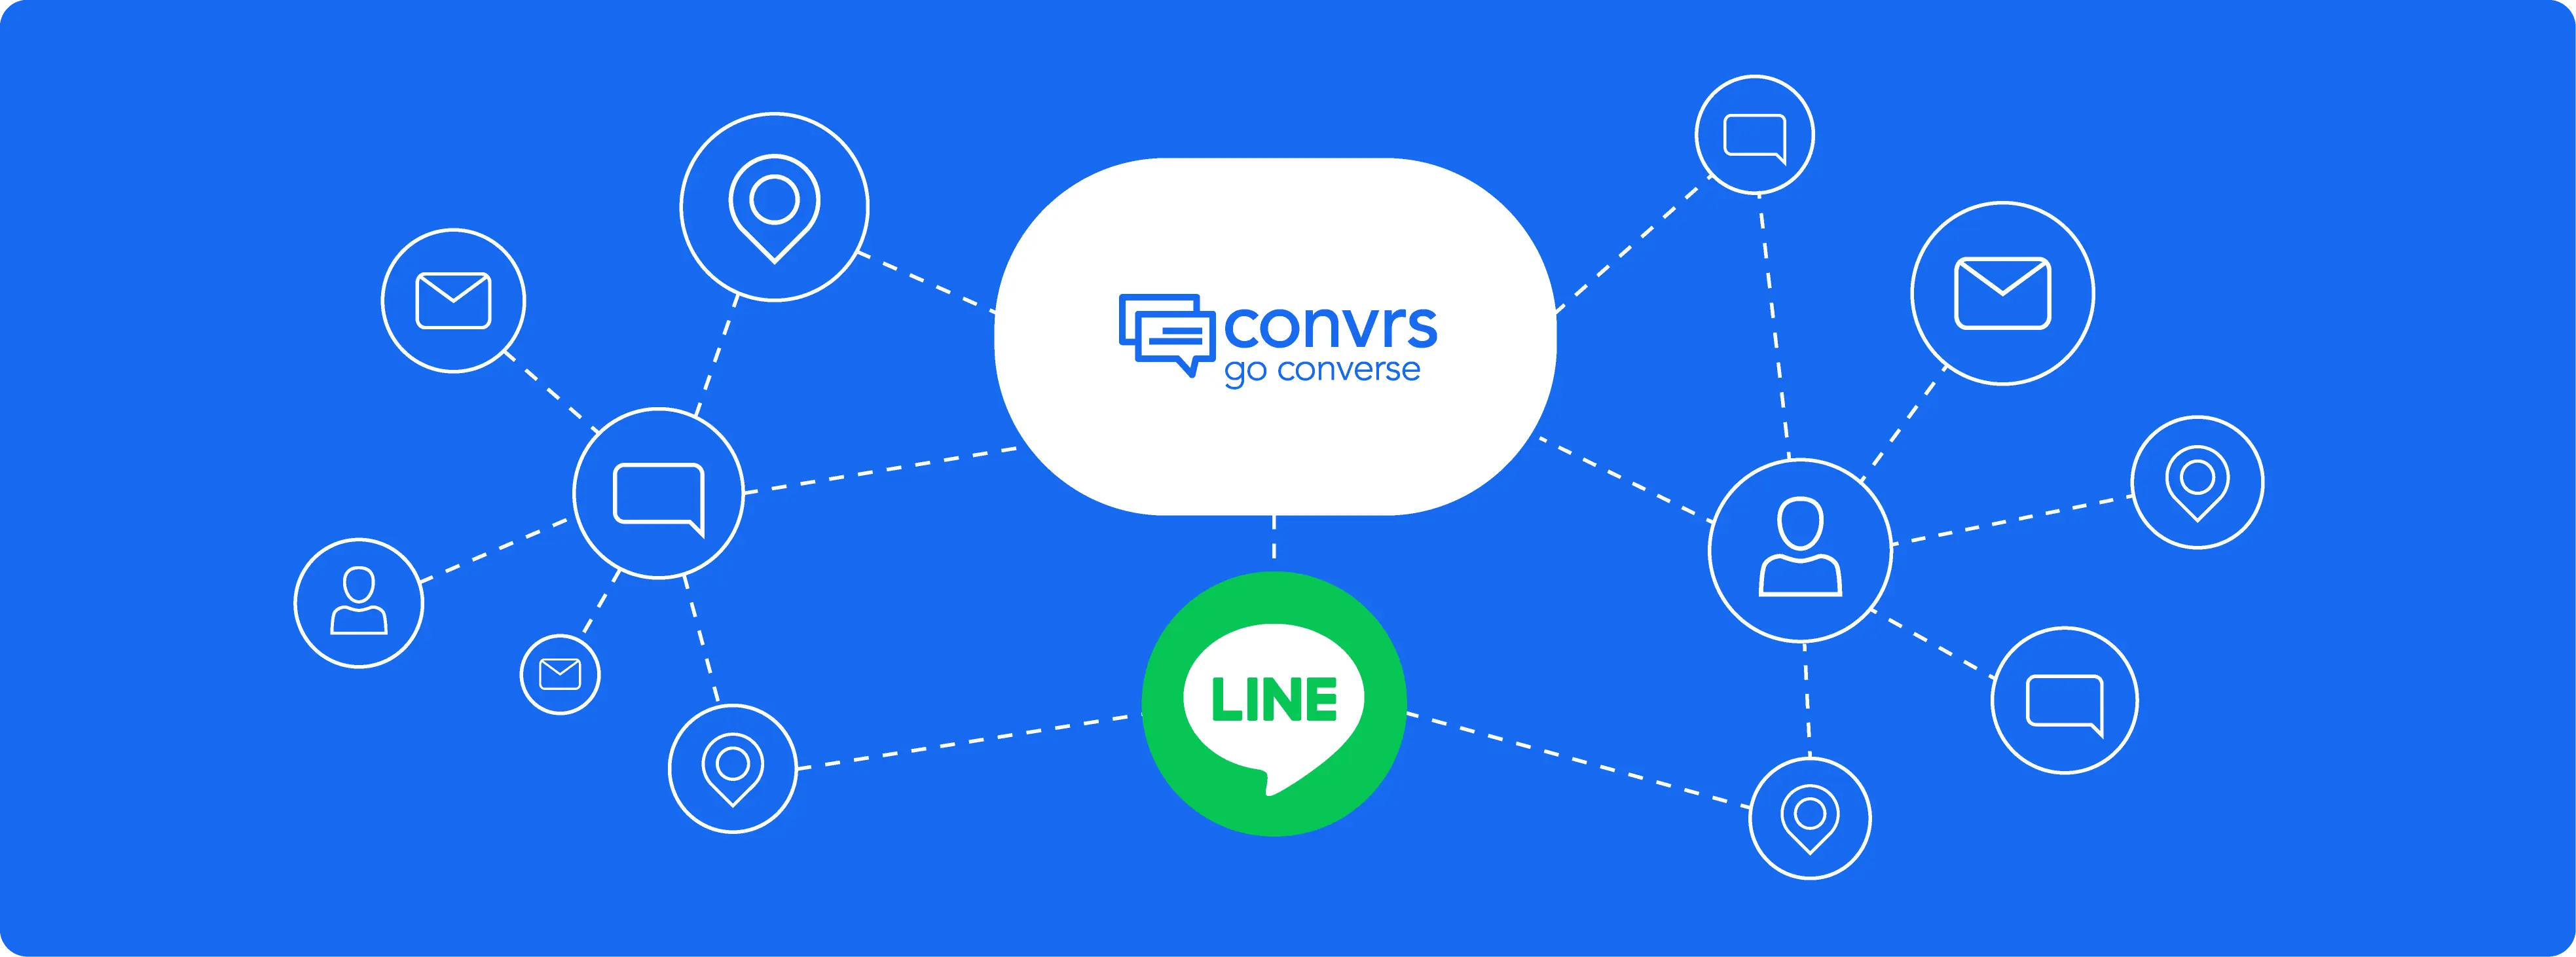 LINE banner - connecting people to business by messaging